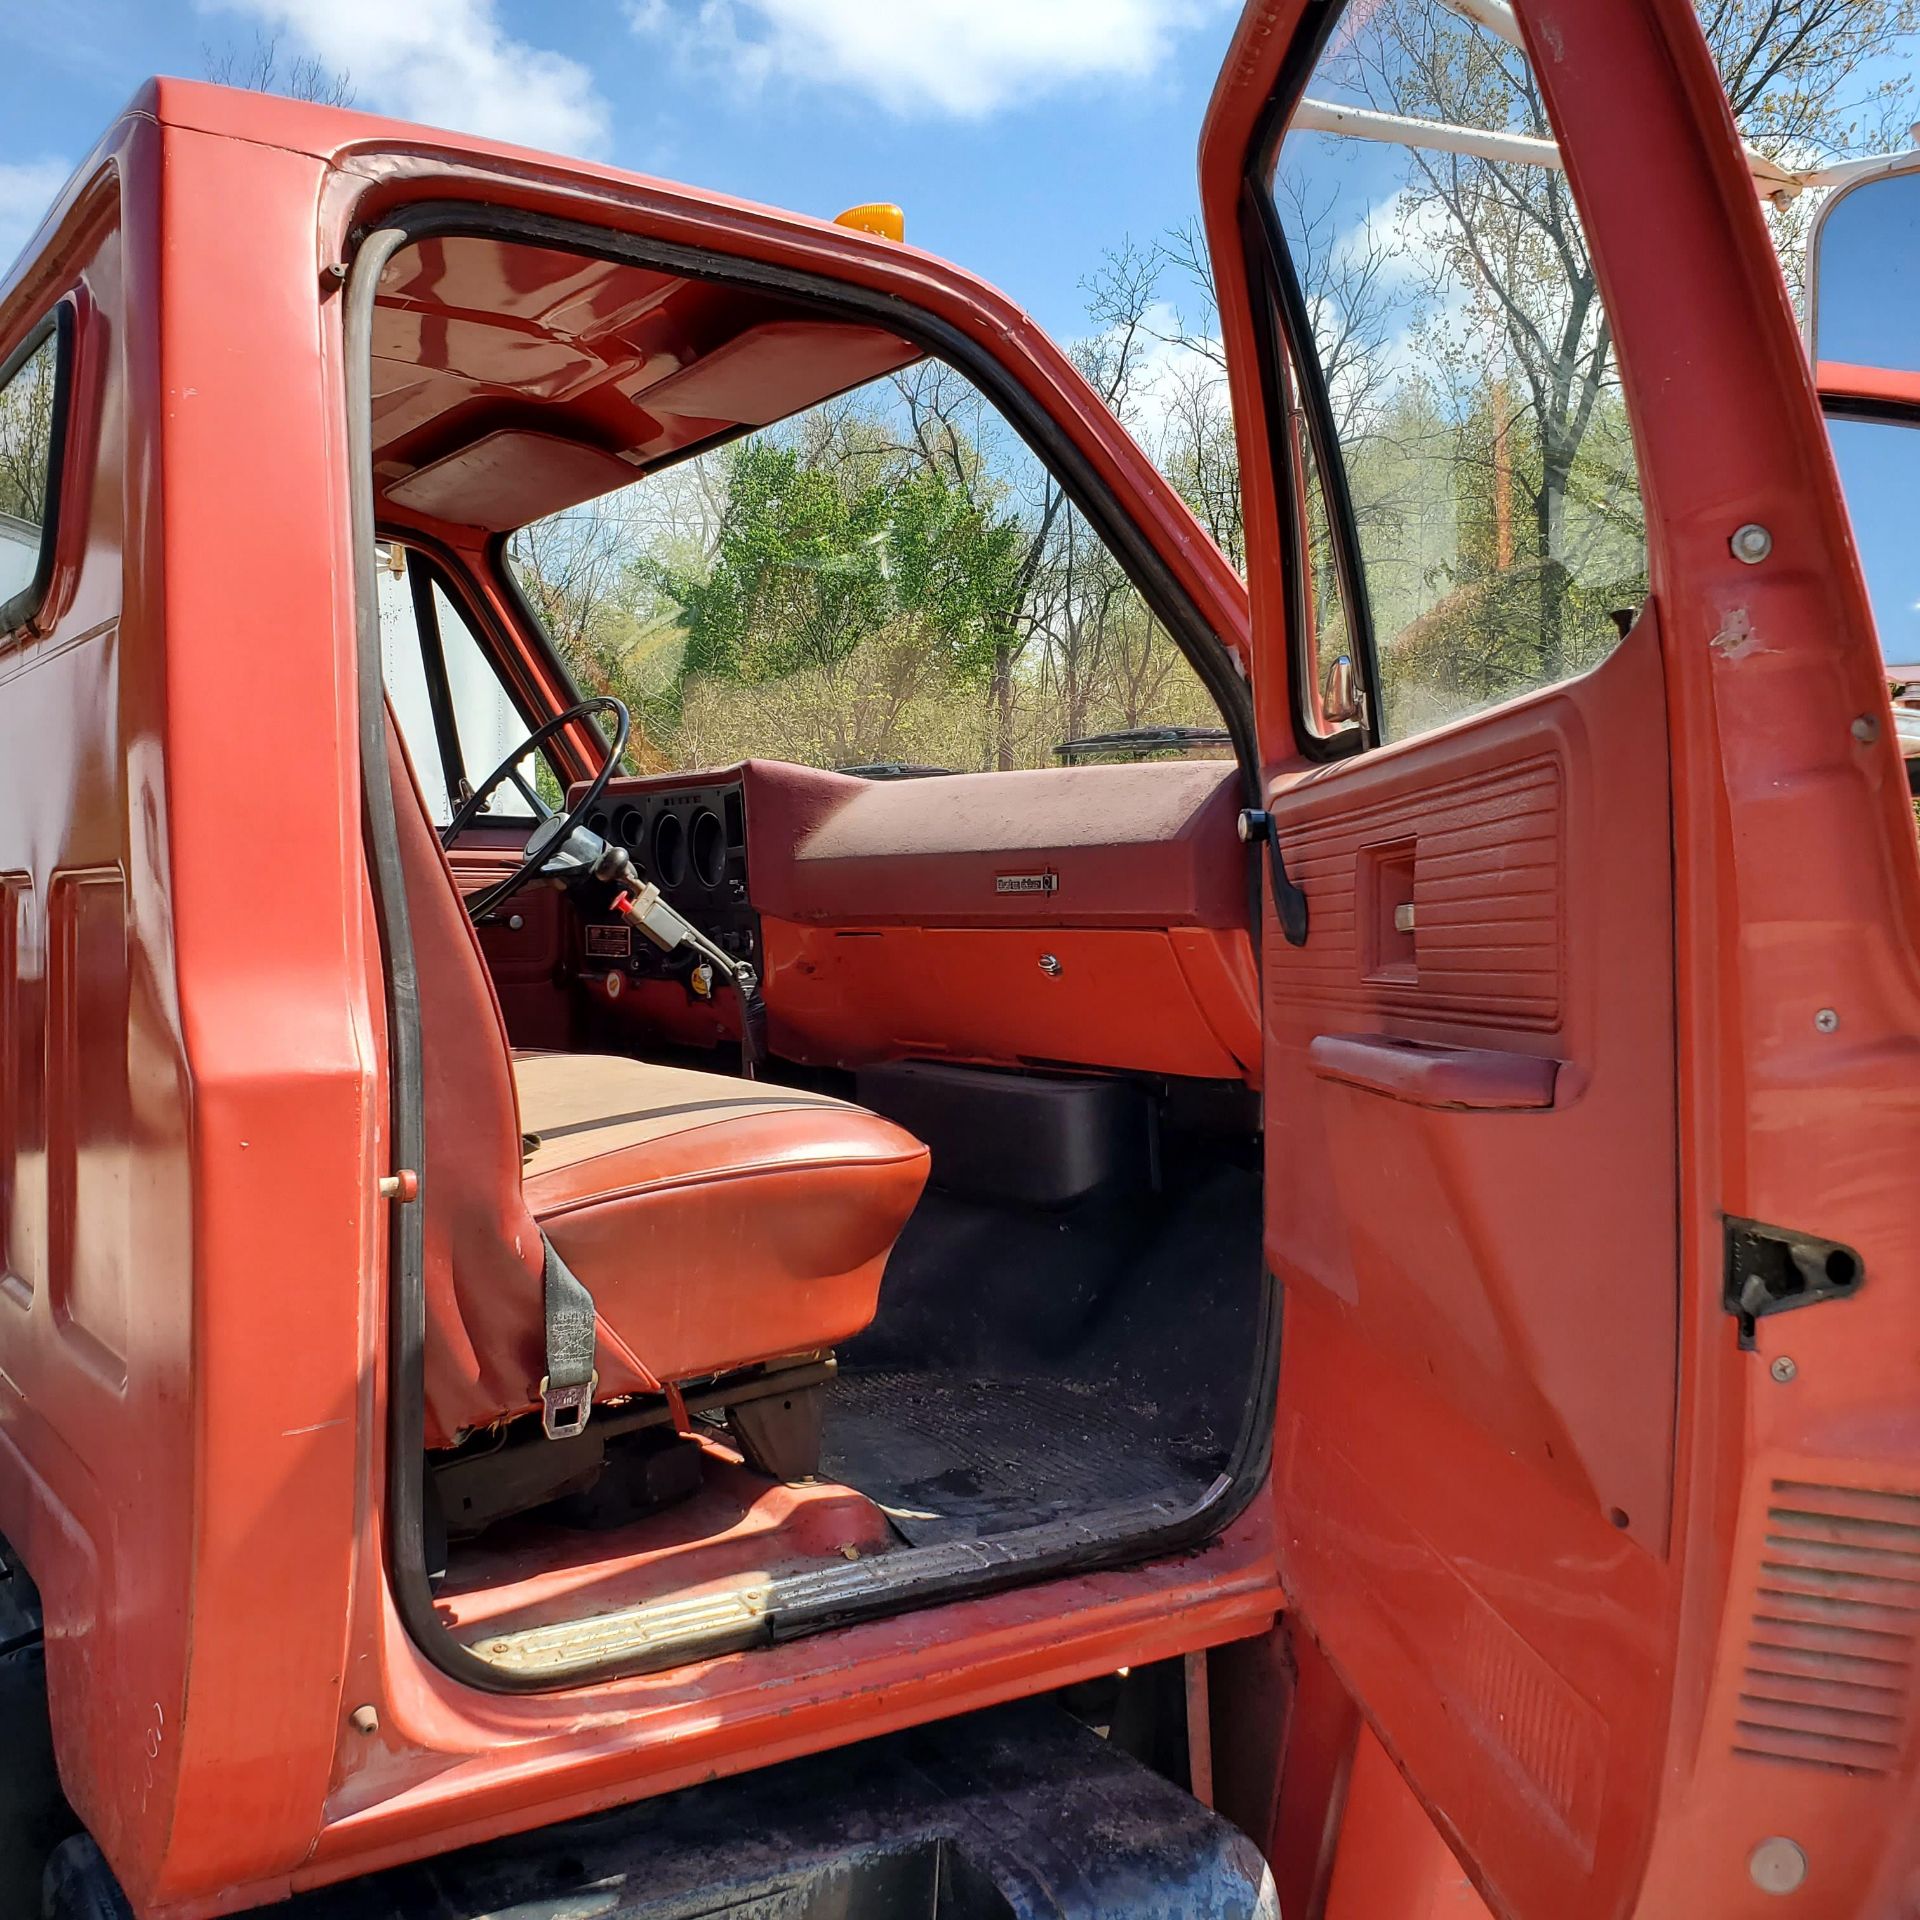 1977 Chevrolet C60 Cab and Chassis, Single Axle w/ Dual Tires and Tag Axle, 5 Speed Transmission - Image 8 of 19